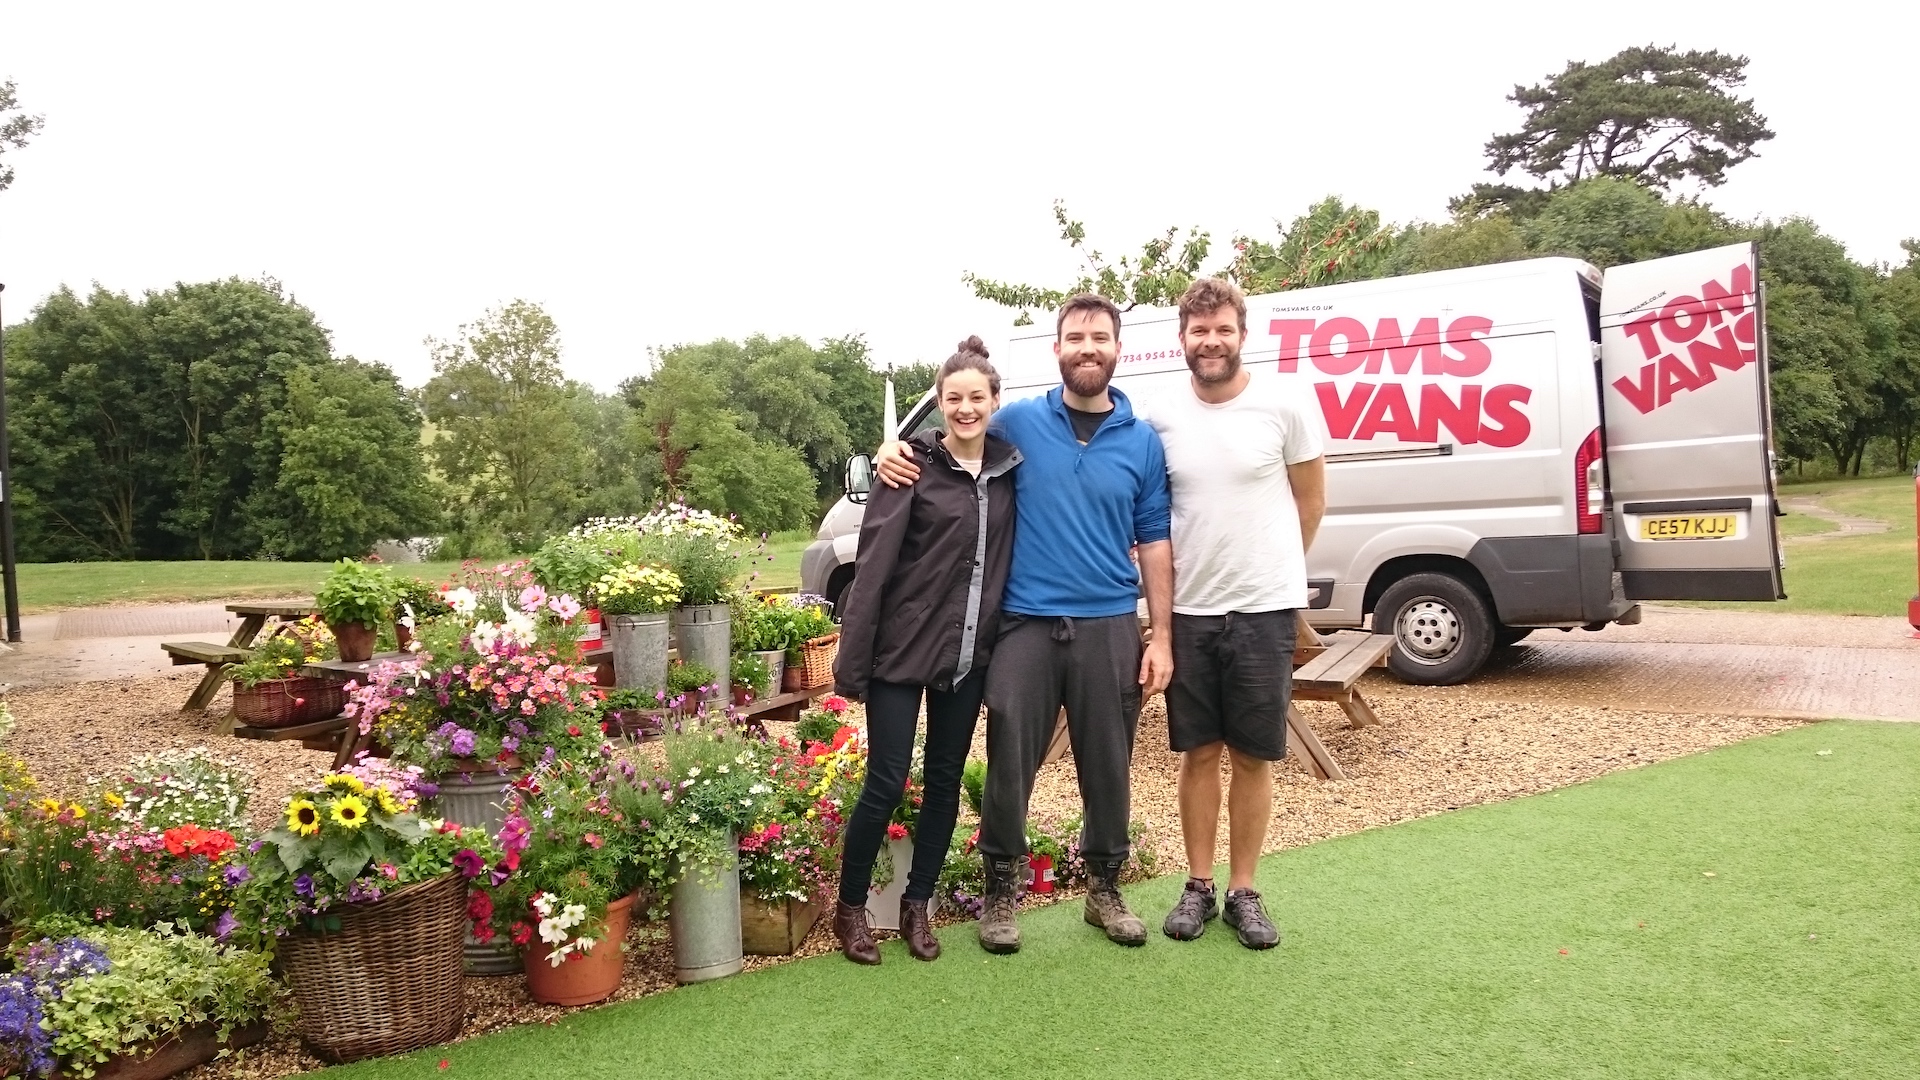 If you're hosting or organising an event in Bristol and need transport contact Tom's Vans Bristol!